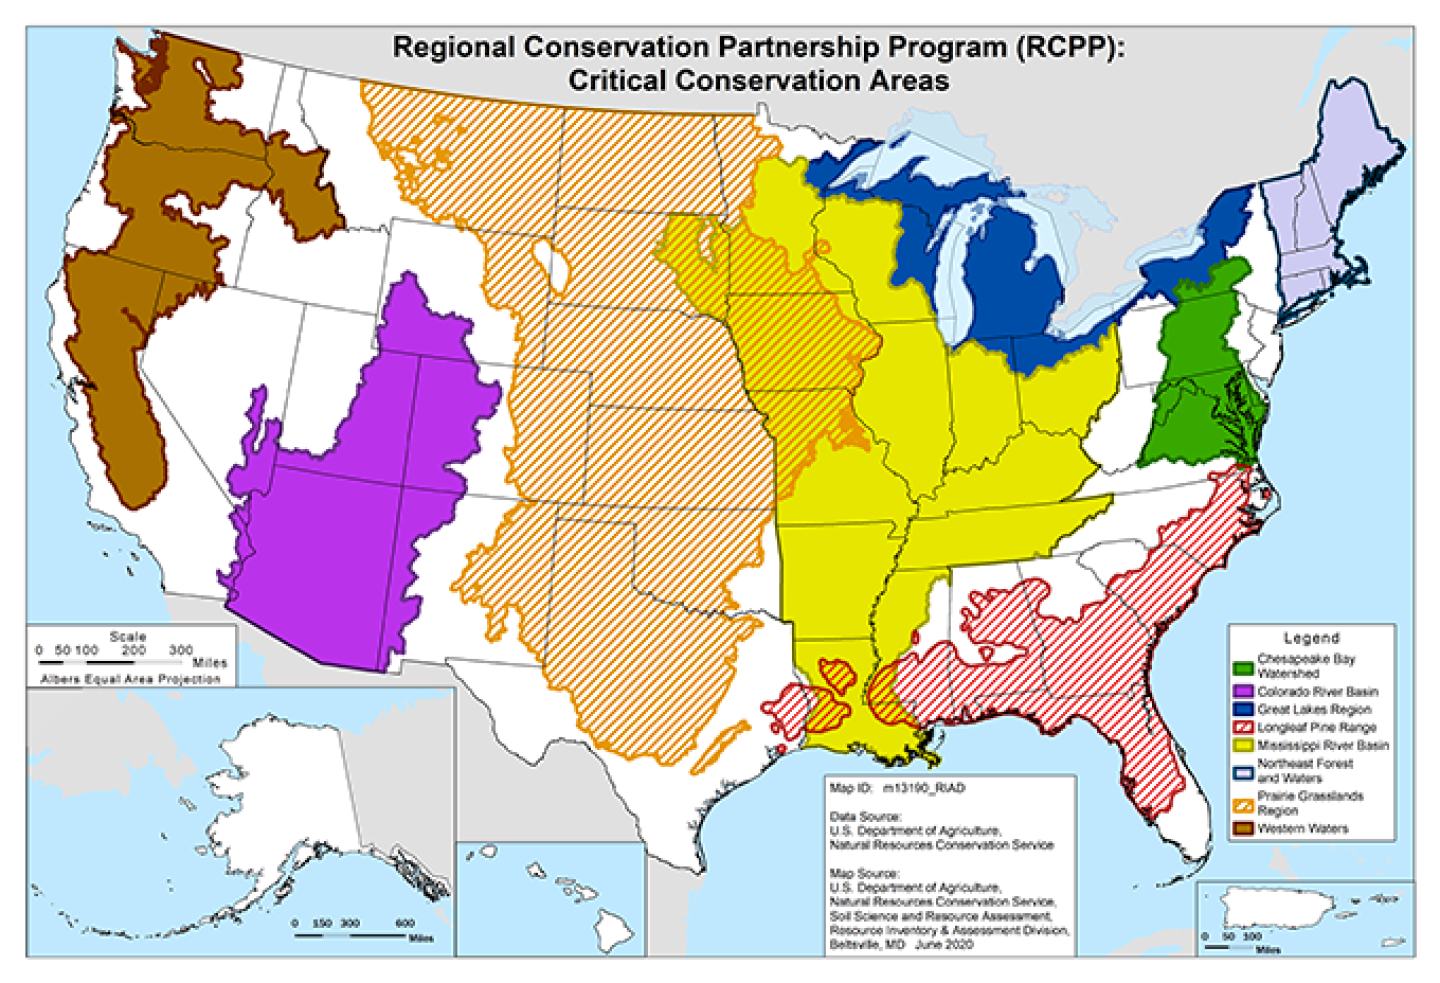 Map of the US color coded for critical conservation areas